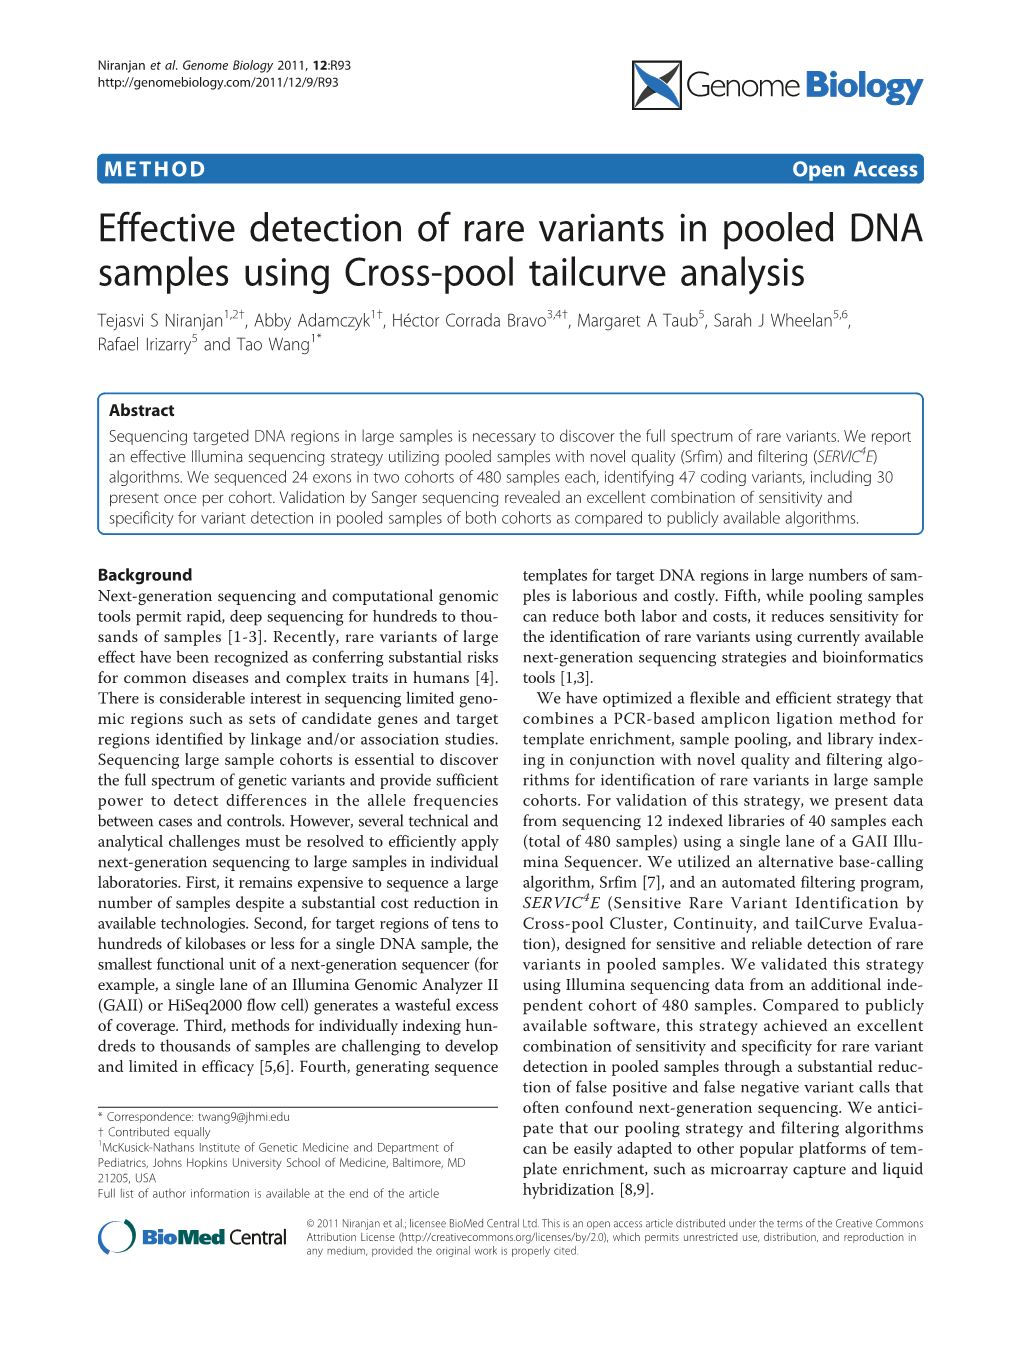 Effective Detection of Rare Variants in Pooled DNA Samples Using Cross